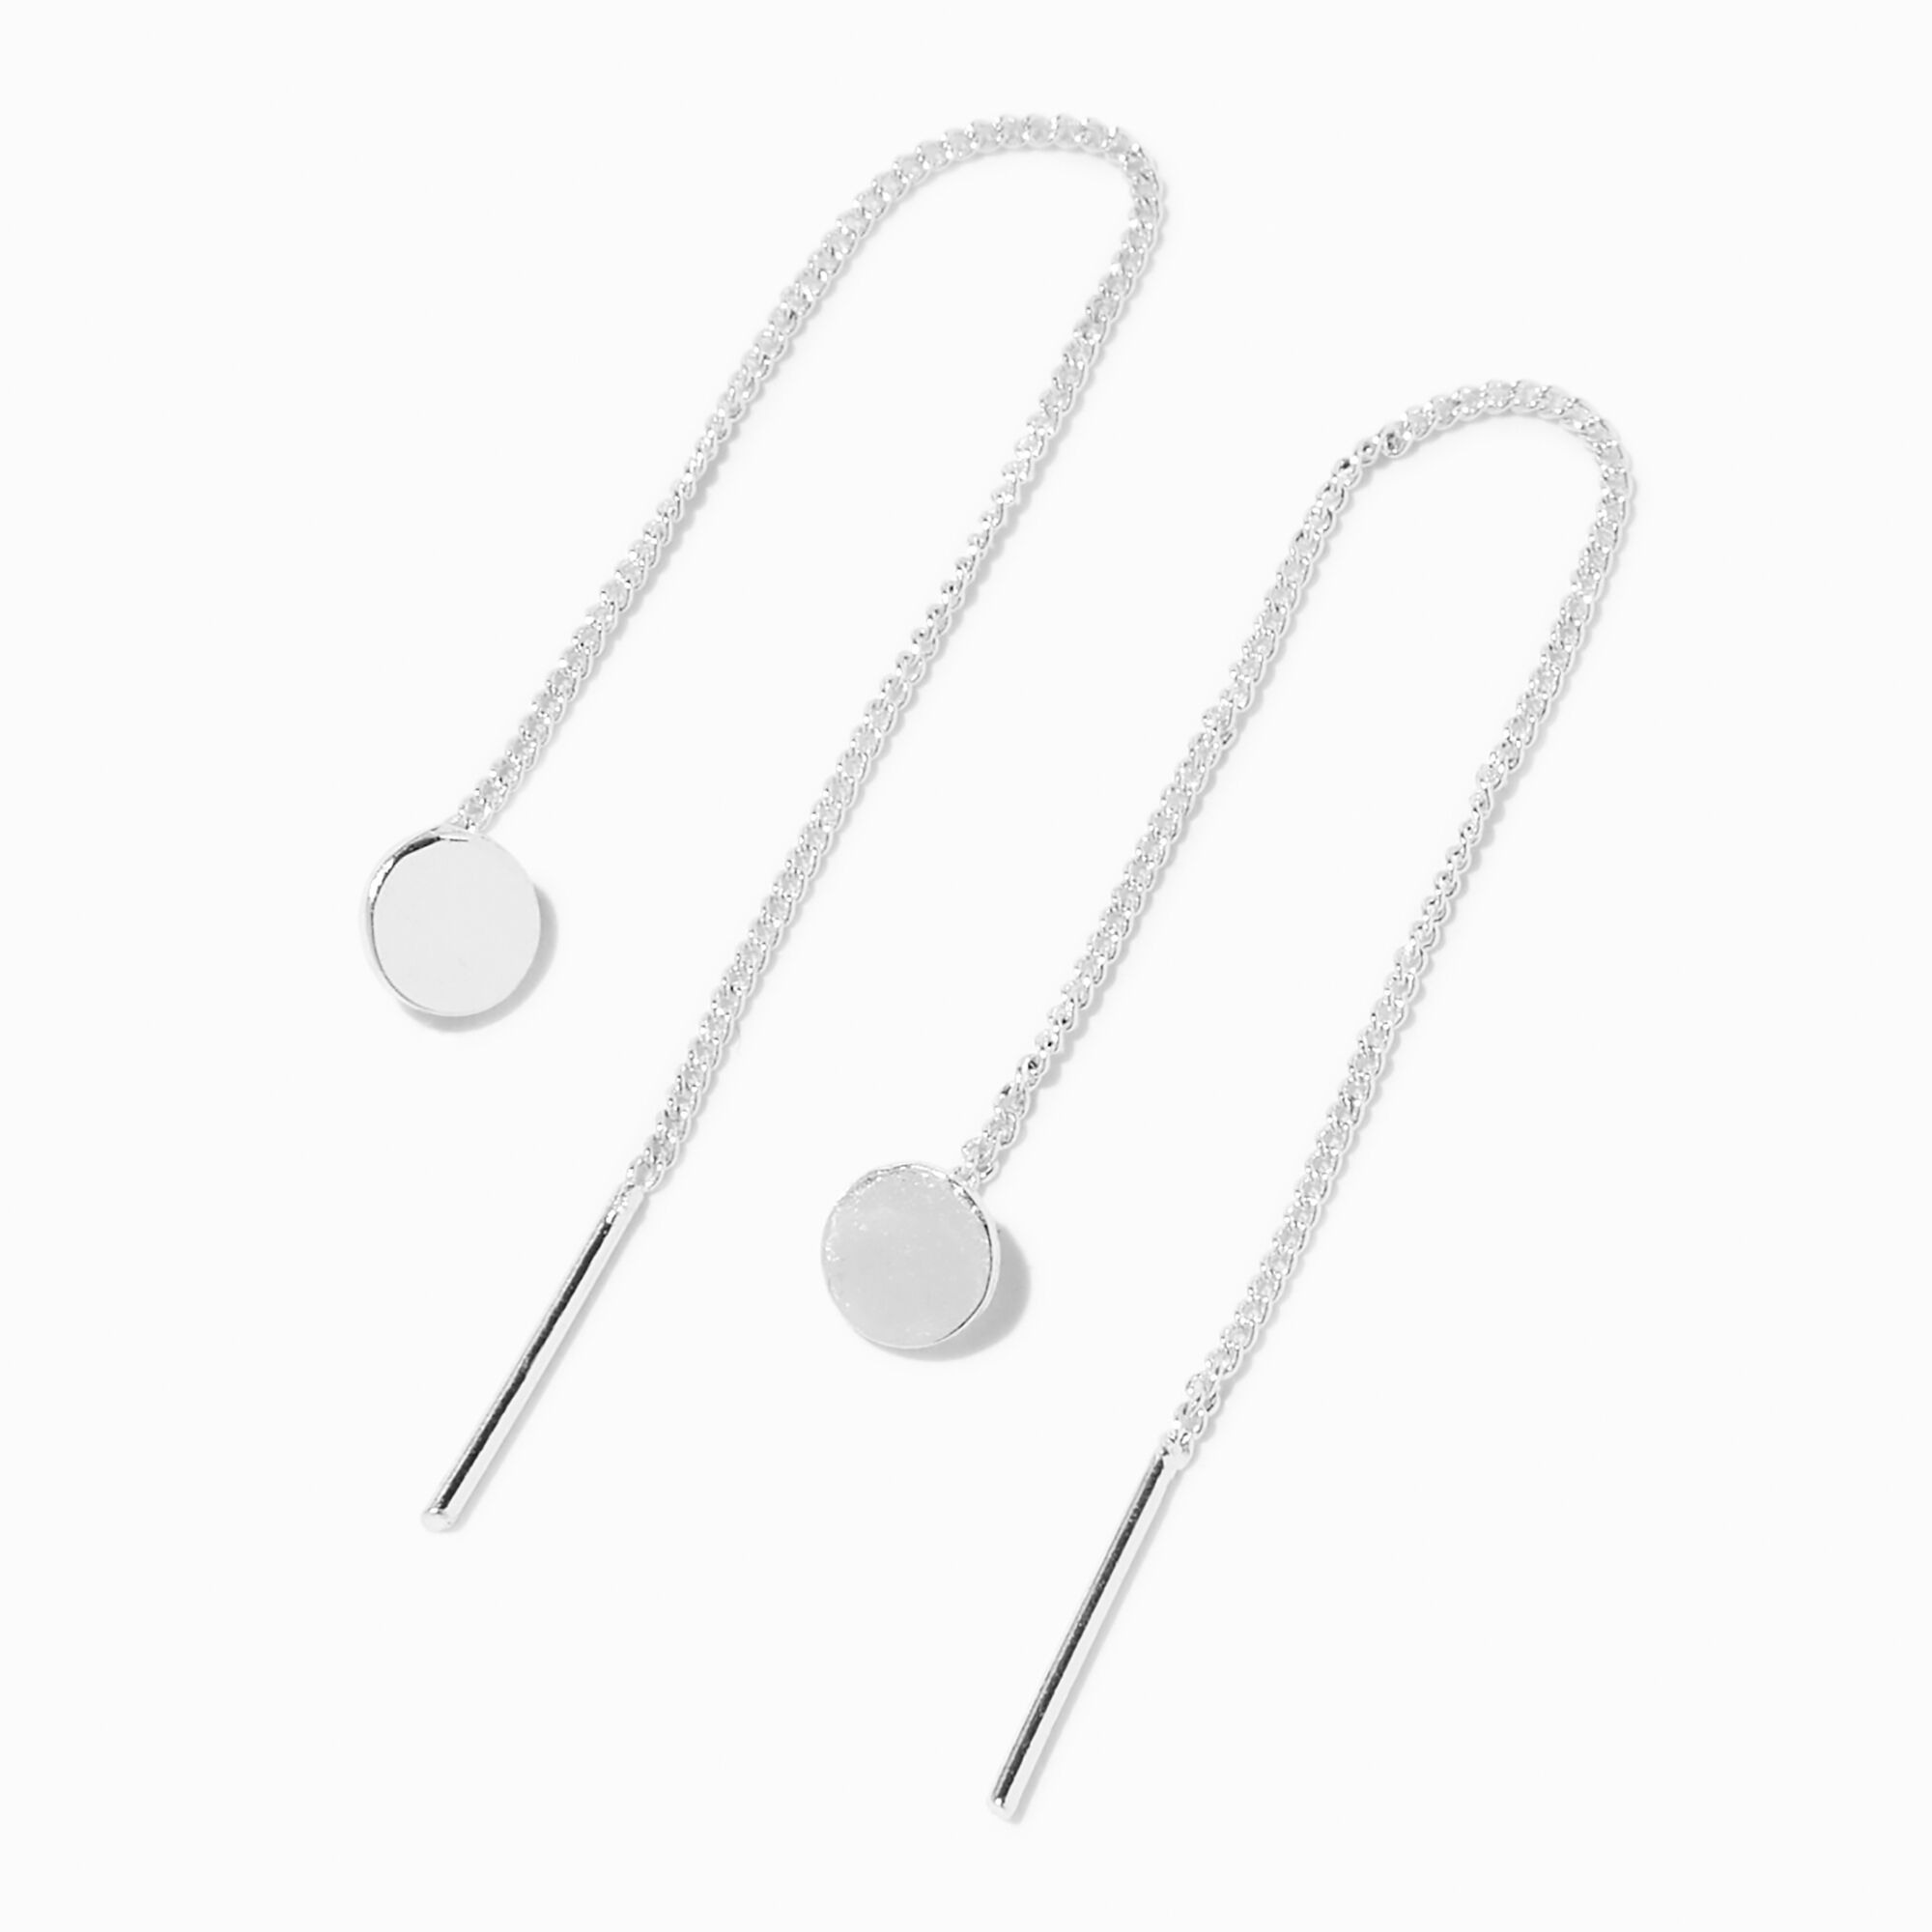 View Claires Tone 4 Linear Dot Threader Drop Earrings Silver information